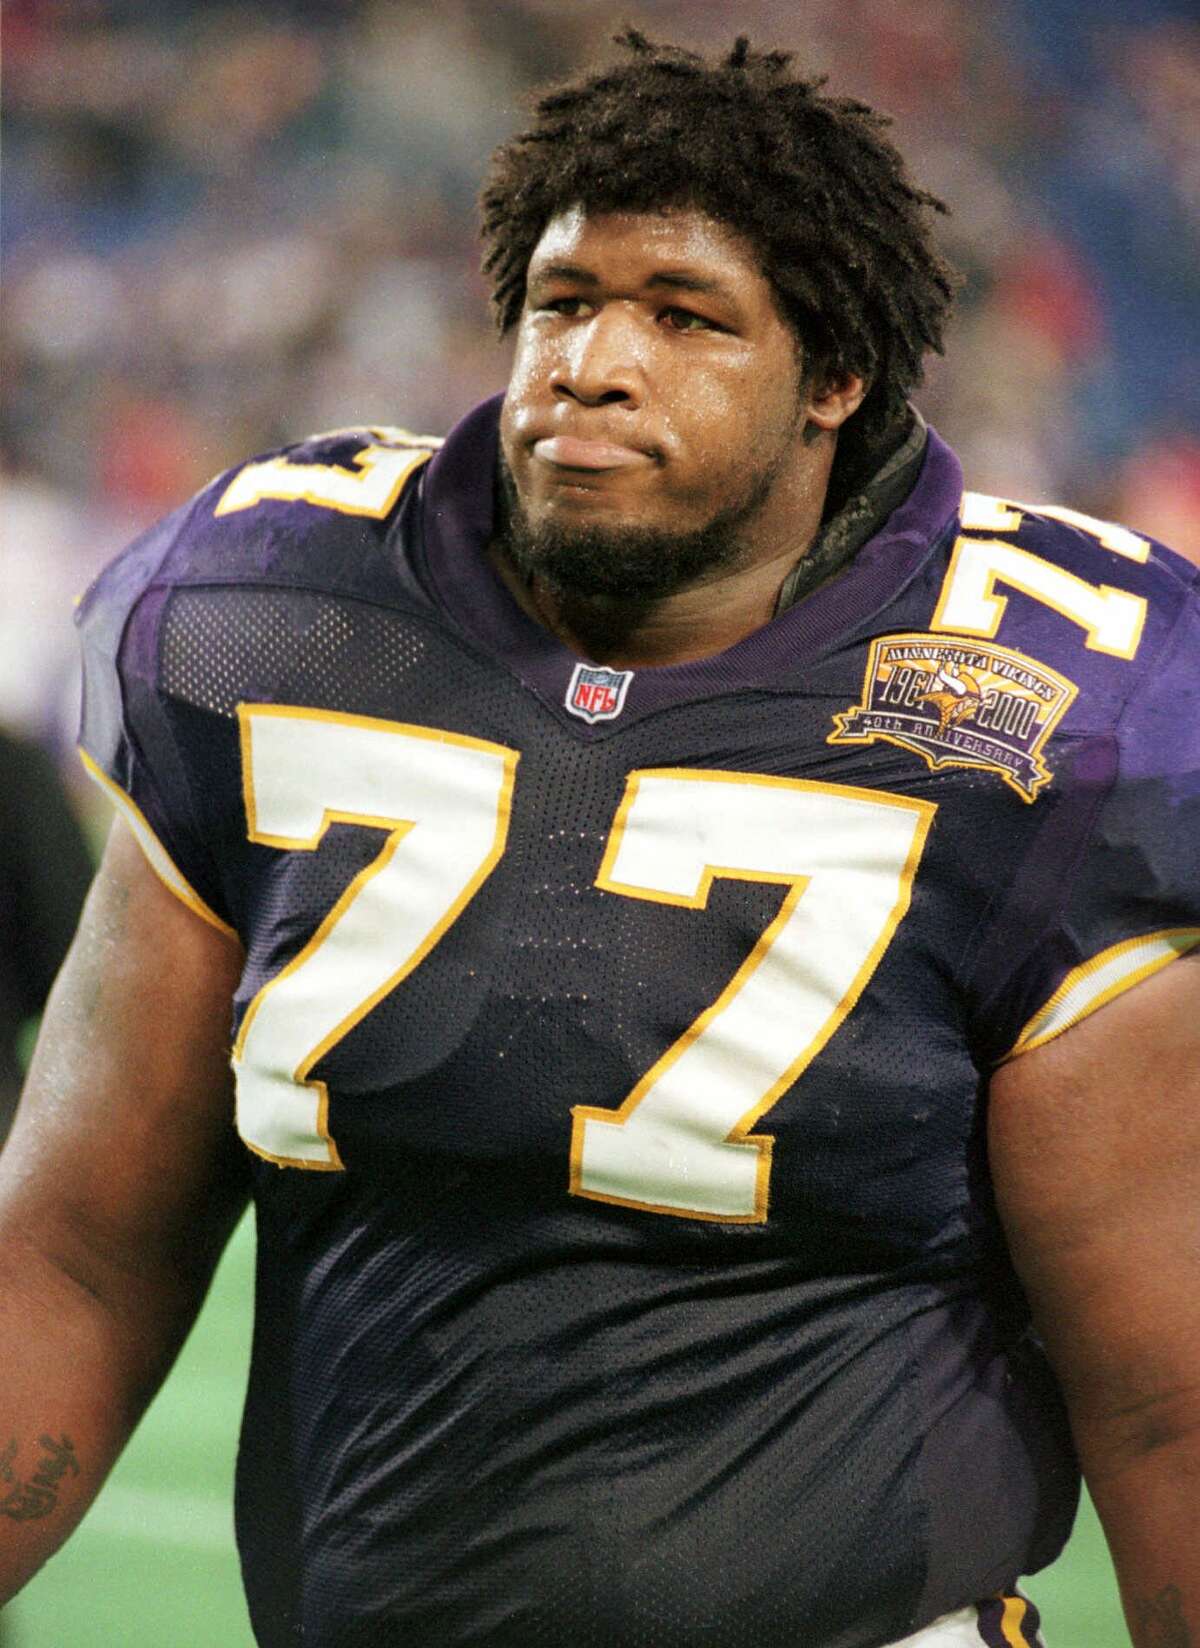 Korey Stringer 27 (May 8, 1974 – August 1, 2001)The Minnesota Vikings offensive tackle died from complications after he collapsed from heatstroke during summer training camp.